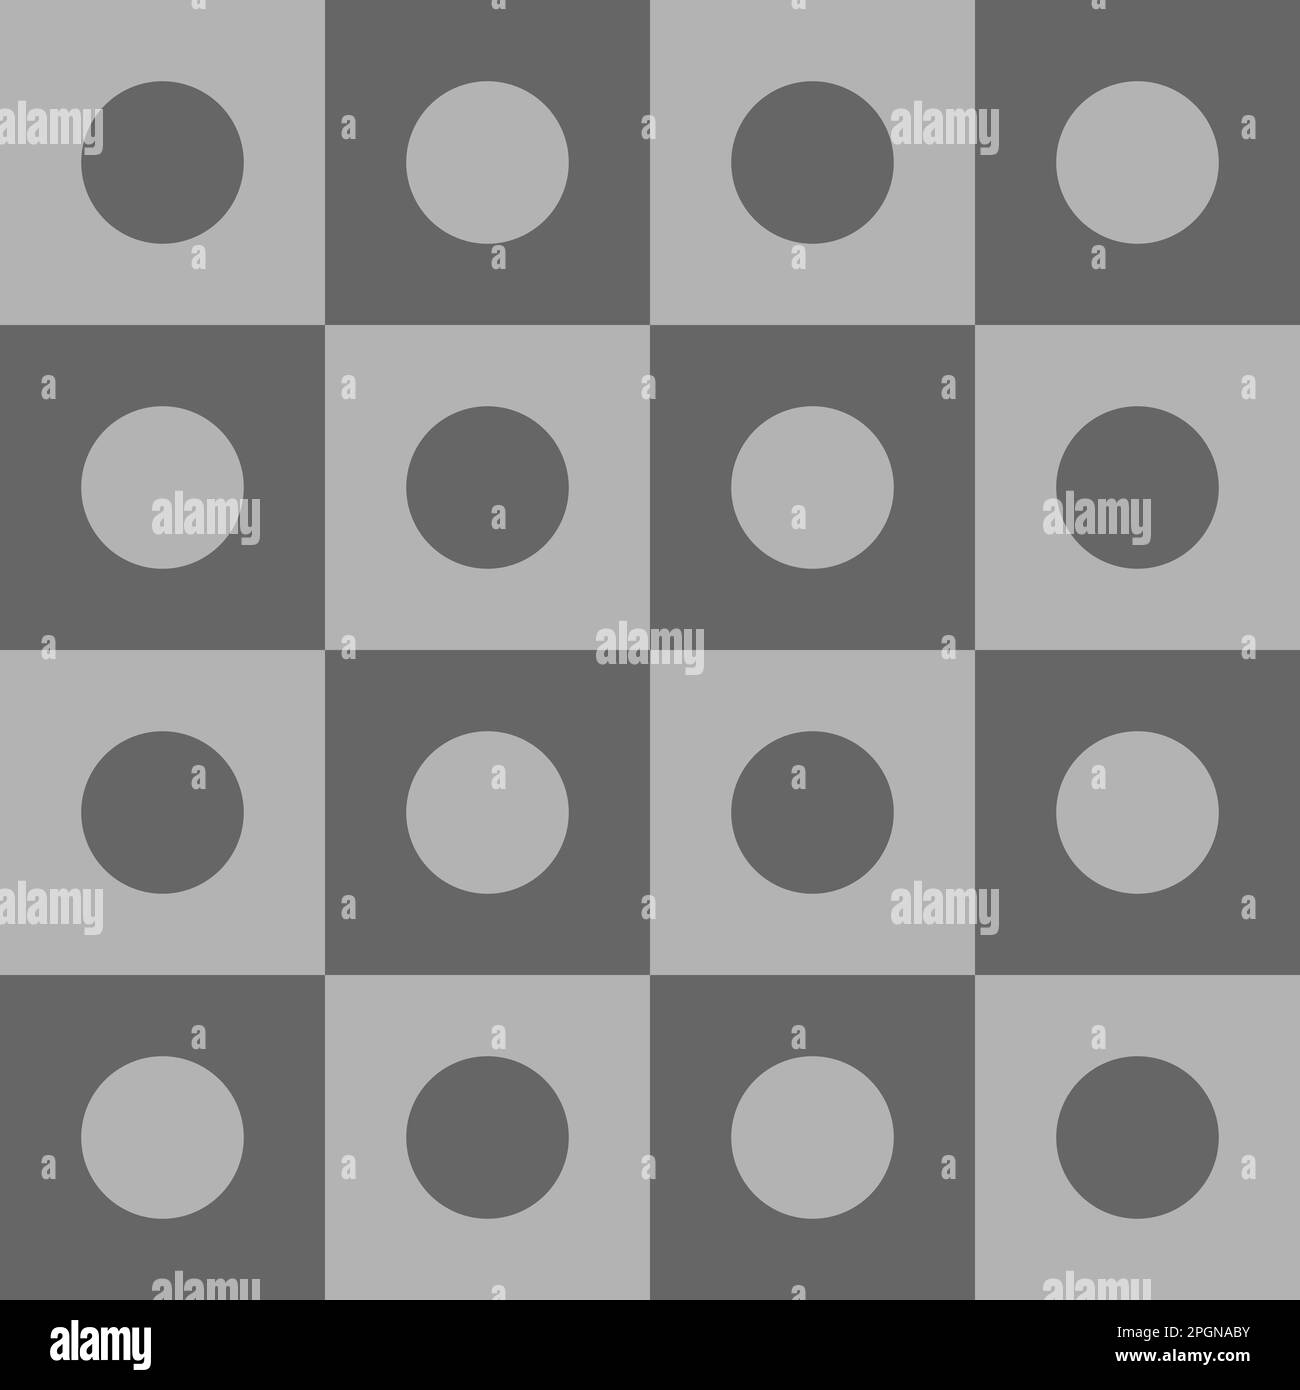 Seamless vector graphic of circles within squares in two shades of grey forming a geometric pattern. Stock Vector